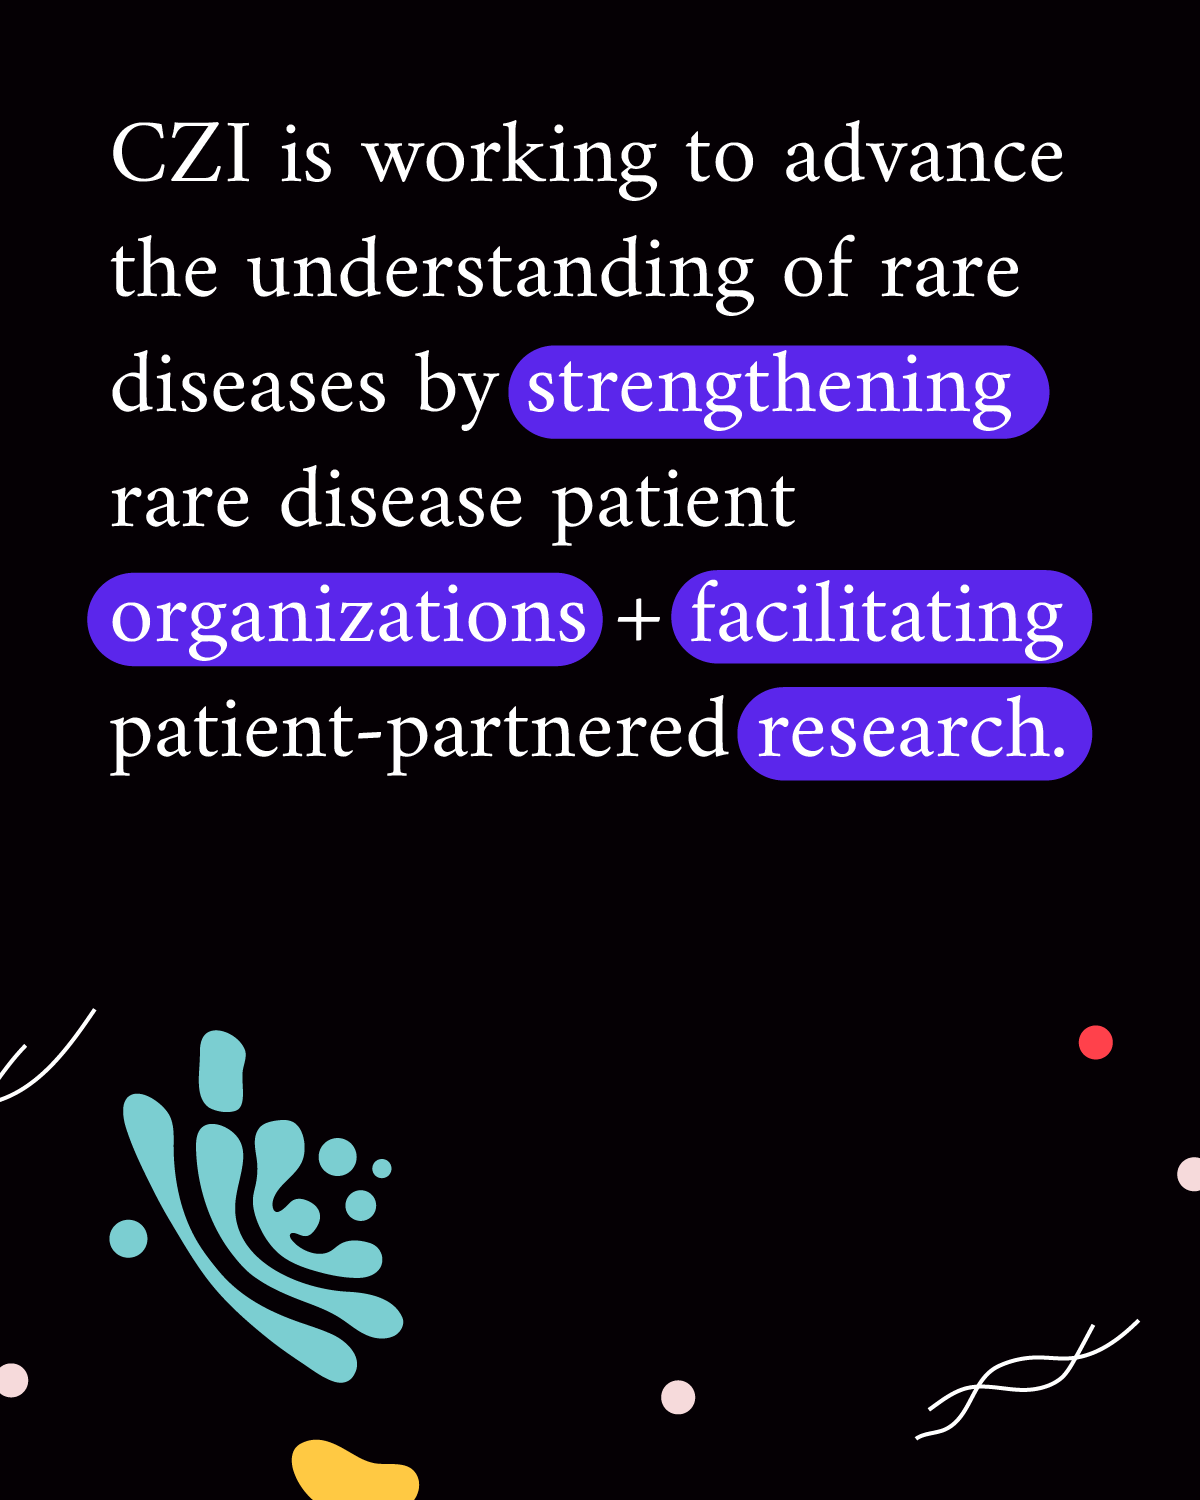 Infographic reading “CZI is working to advance the understanding of rare diseases by strengthening rare disease patient organizations + facilitating patient-partnered research.” Green, yellow, and white squiggles and dots— representing parts of a cell — accompany the text.